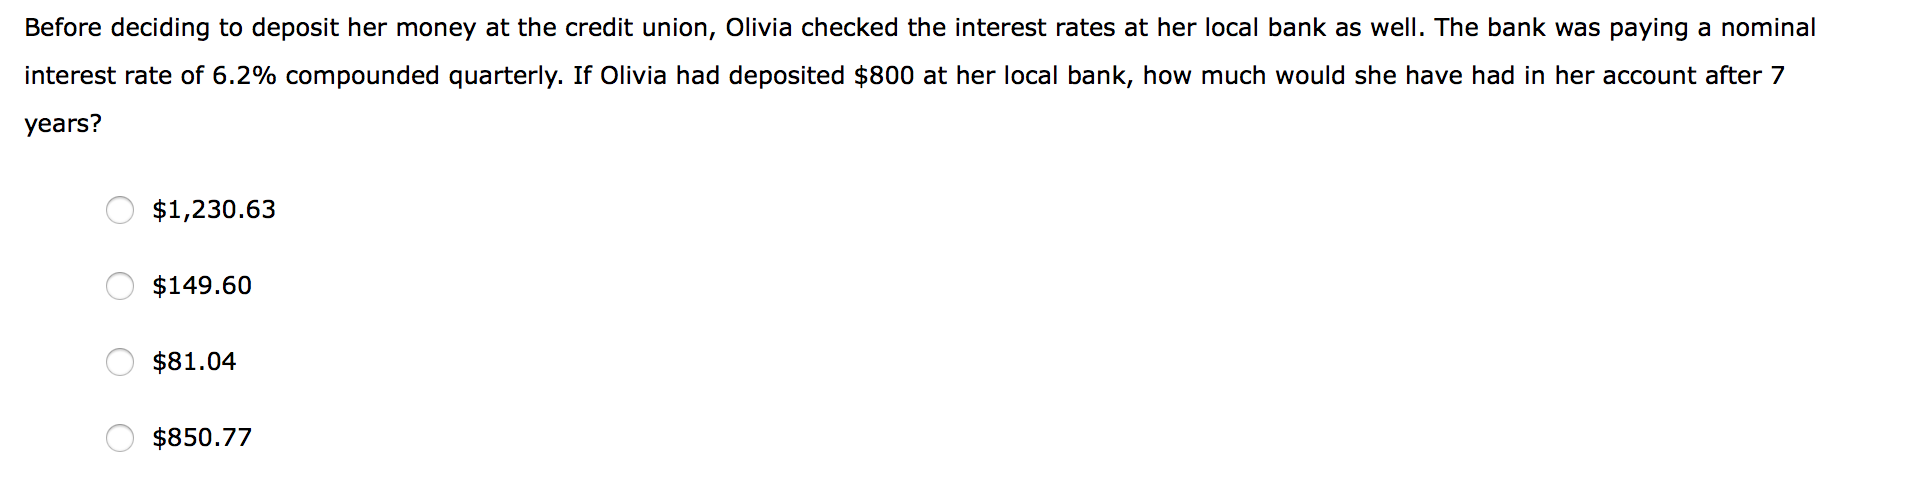 Before deciding to deposit her money at the credit union, olivia checked the interest rates at her local bank as well. the ba